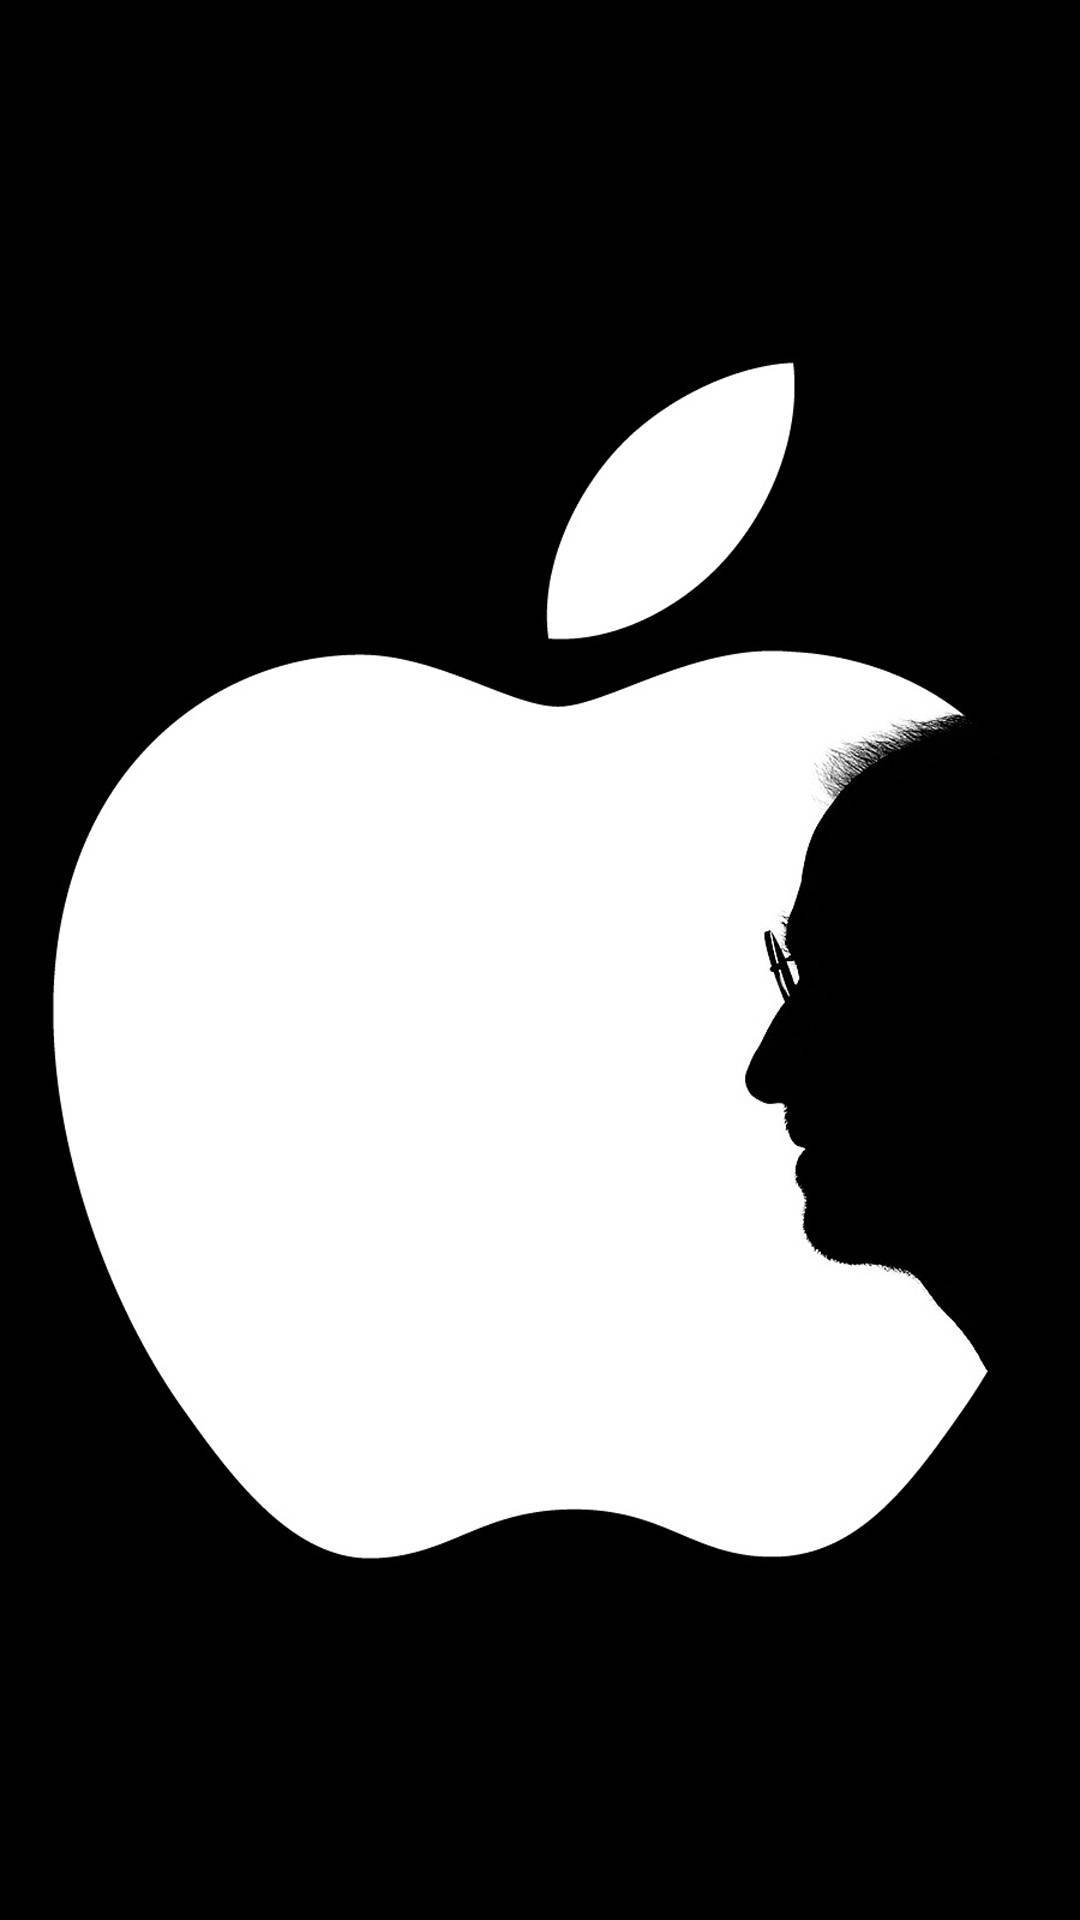 1080x1920 Steve Jobs 2 Wallpaper for iPhone 11, Pro Max, X, 8, 7, 6 Free Download on 3Wallpapers